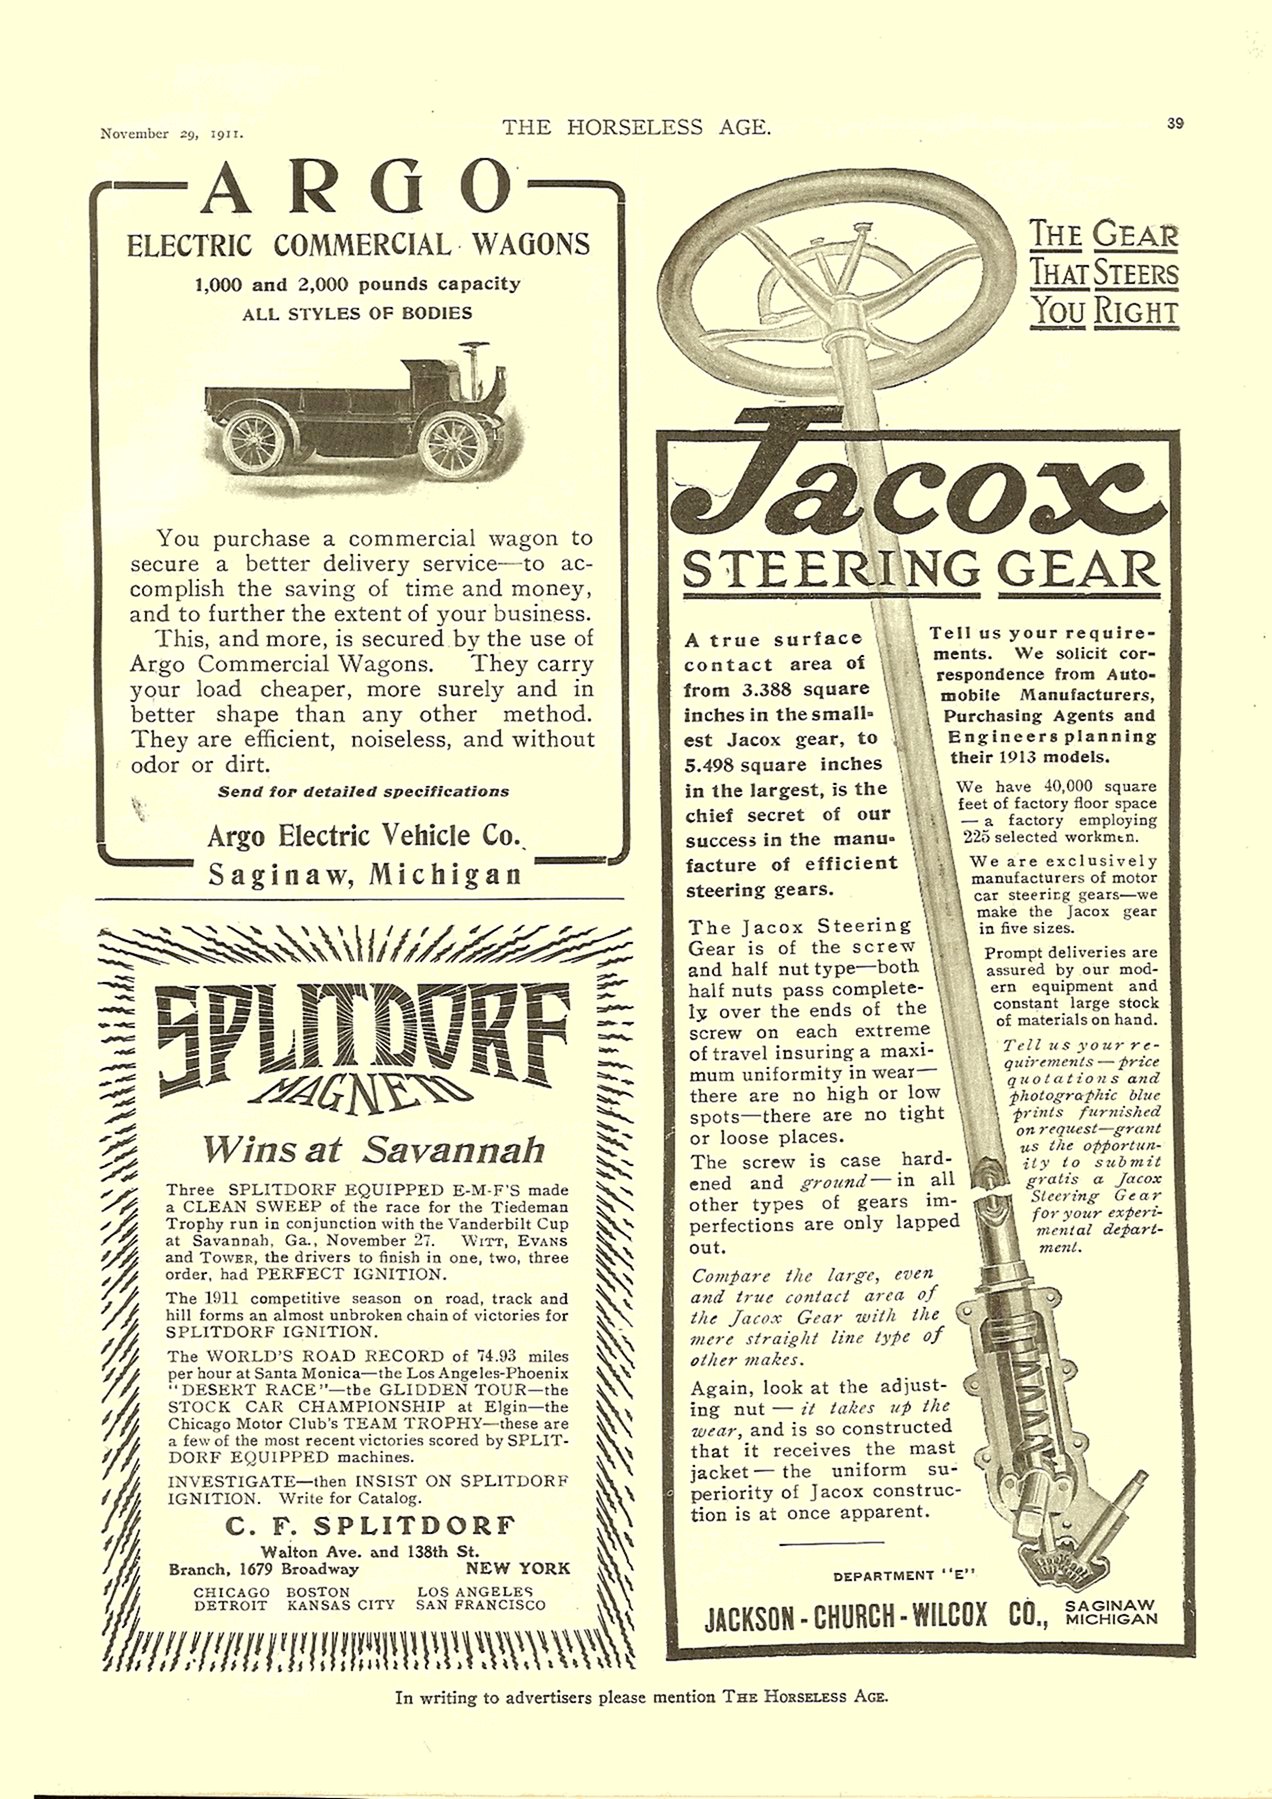 1911 11 29 ARGO Electric Commercial Wagons Argo Electric Vehicle Co. Saginaw, Michigan The Horseless Age magazine November 29, 1911 Vol. 28 No. 22 9″x12″ page 39